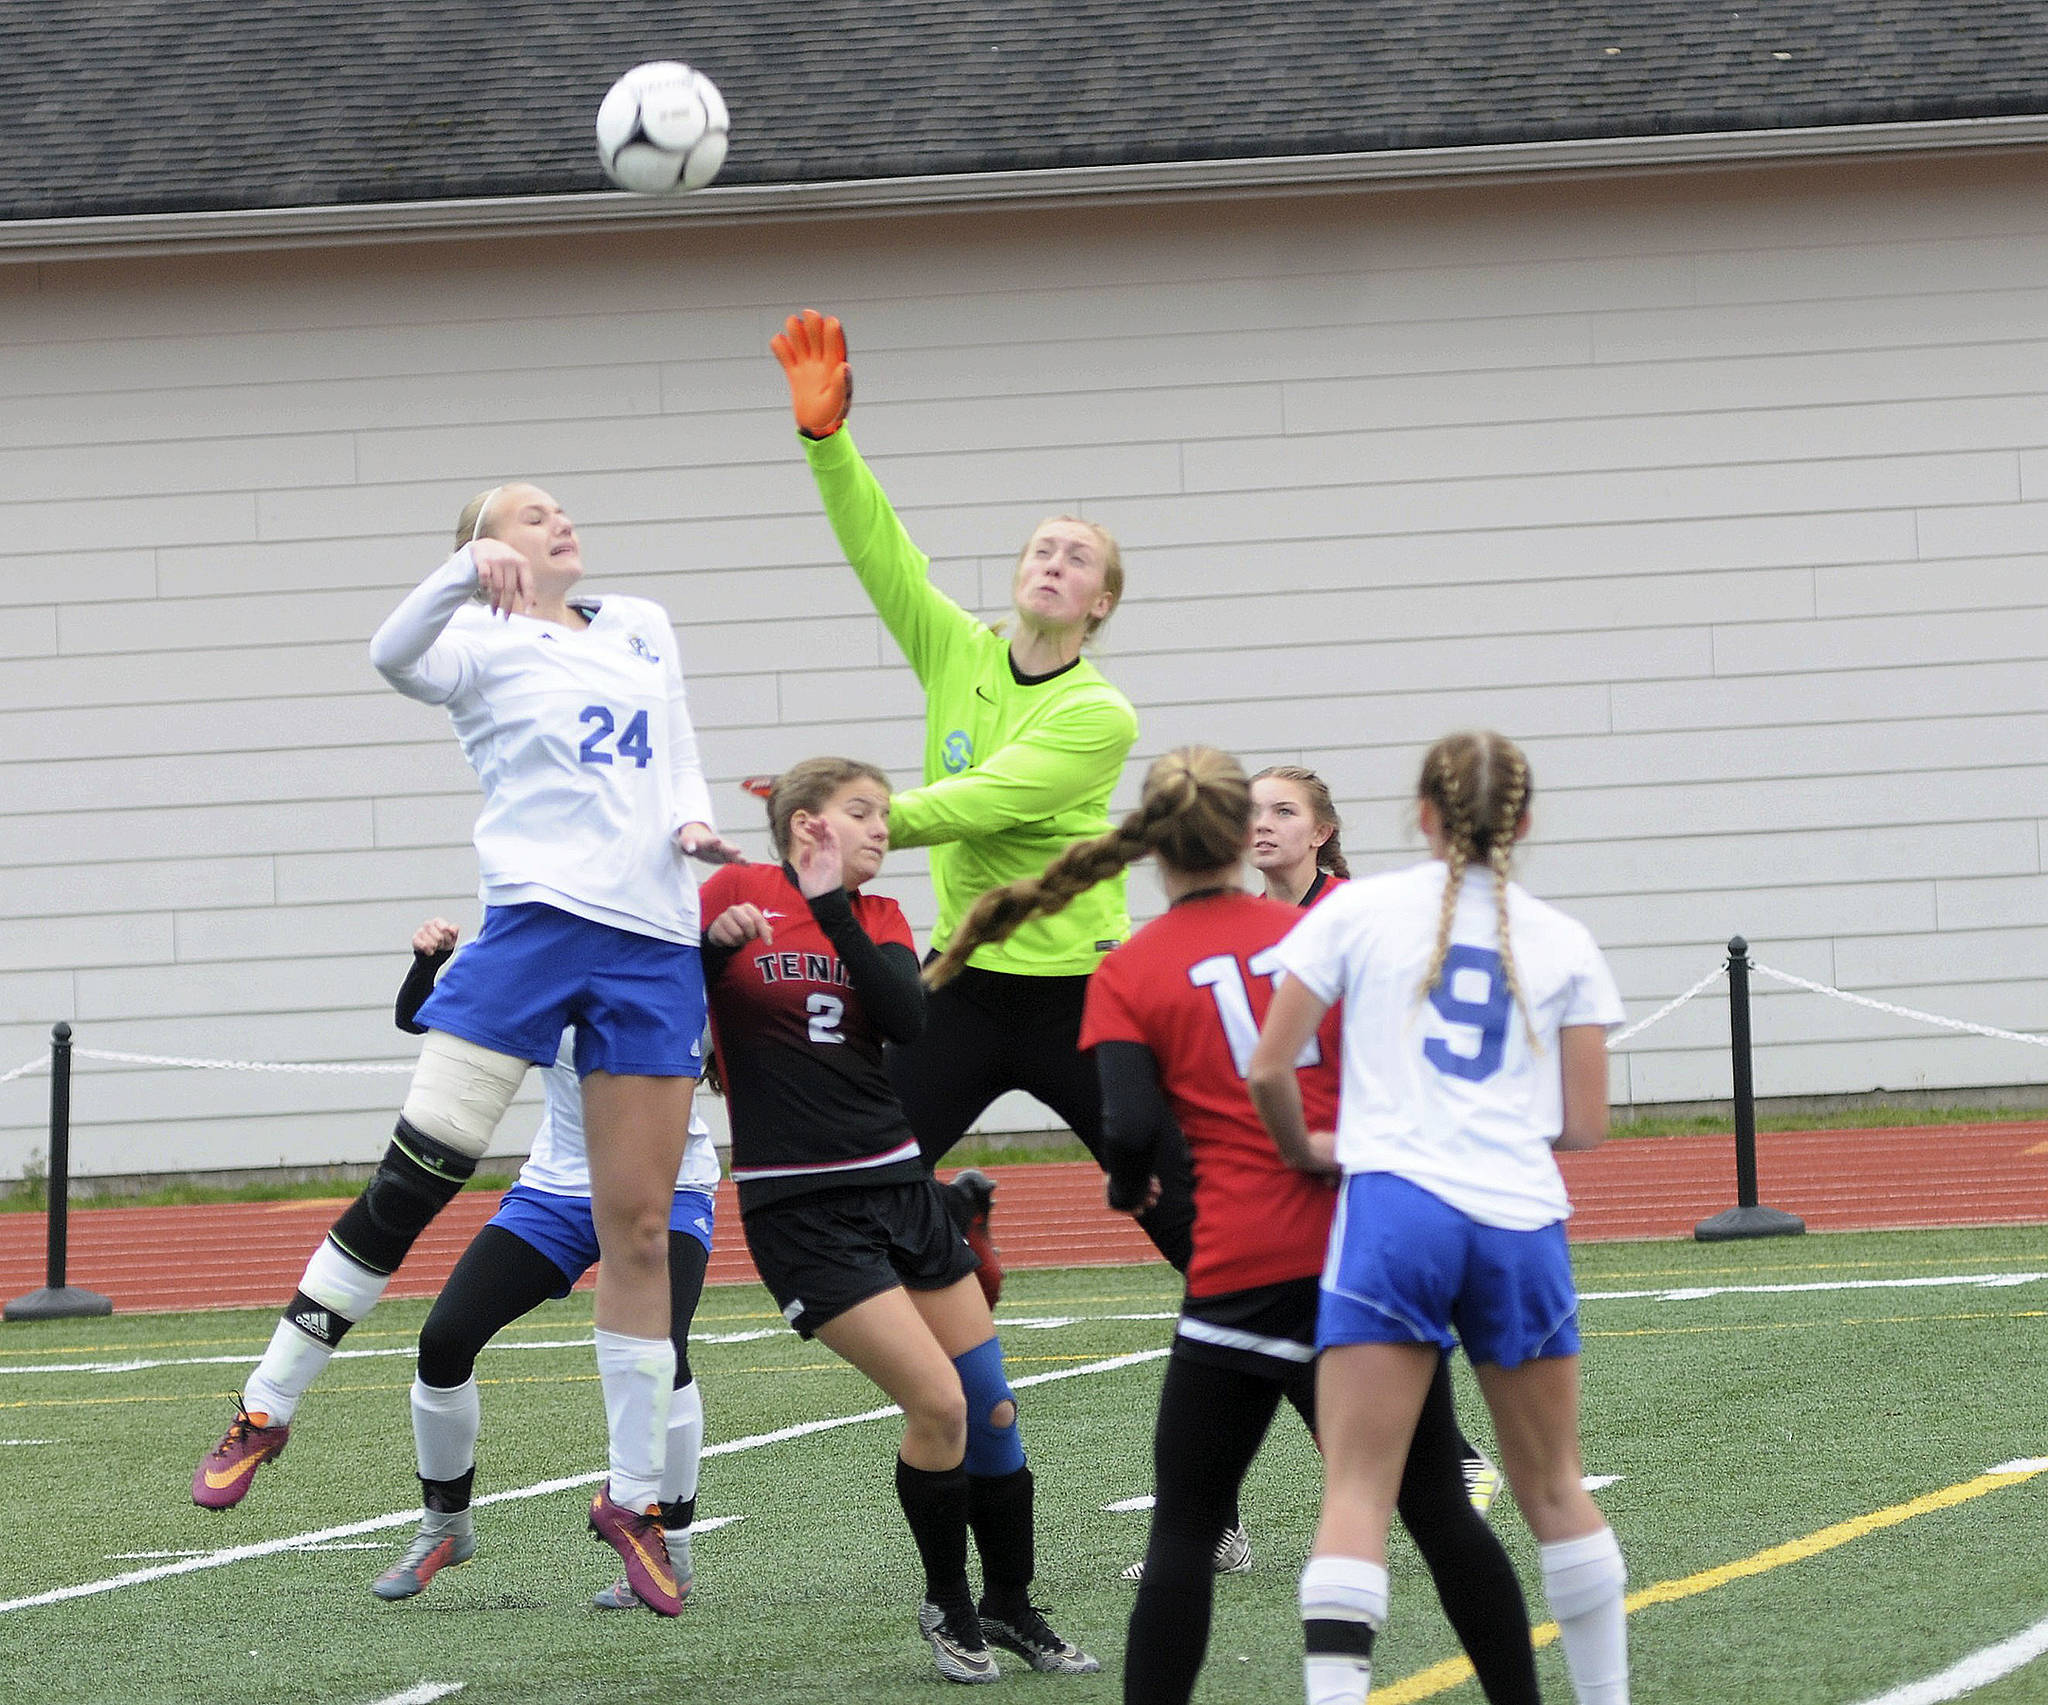 Hasani Grayson | The Daily World                                Molly Johnston (24) goes up for a header against Tenino on Saturday during the third-place game in the District IV Class 1A Girls Soccer Tournament at Rottle Field.